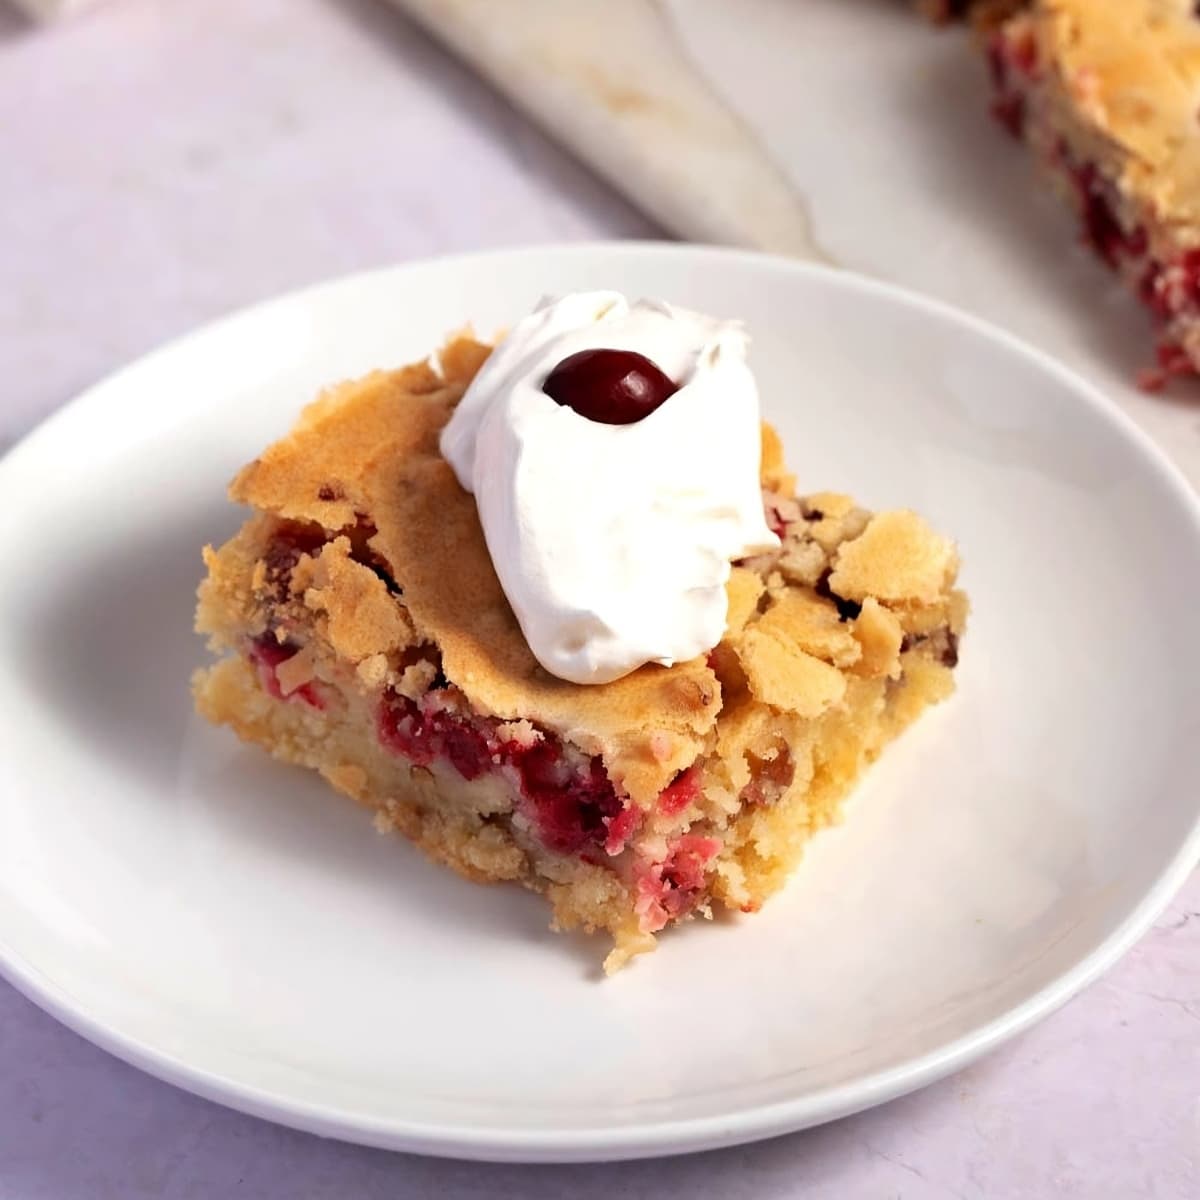 A Slice of Cranberry Christmas Cake with Whipped Cream